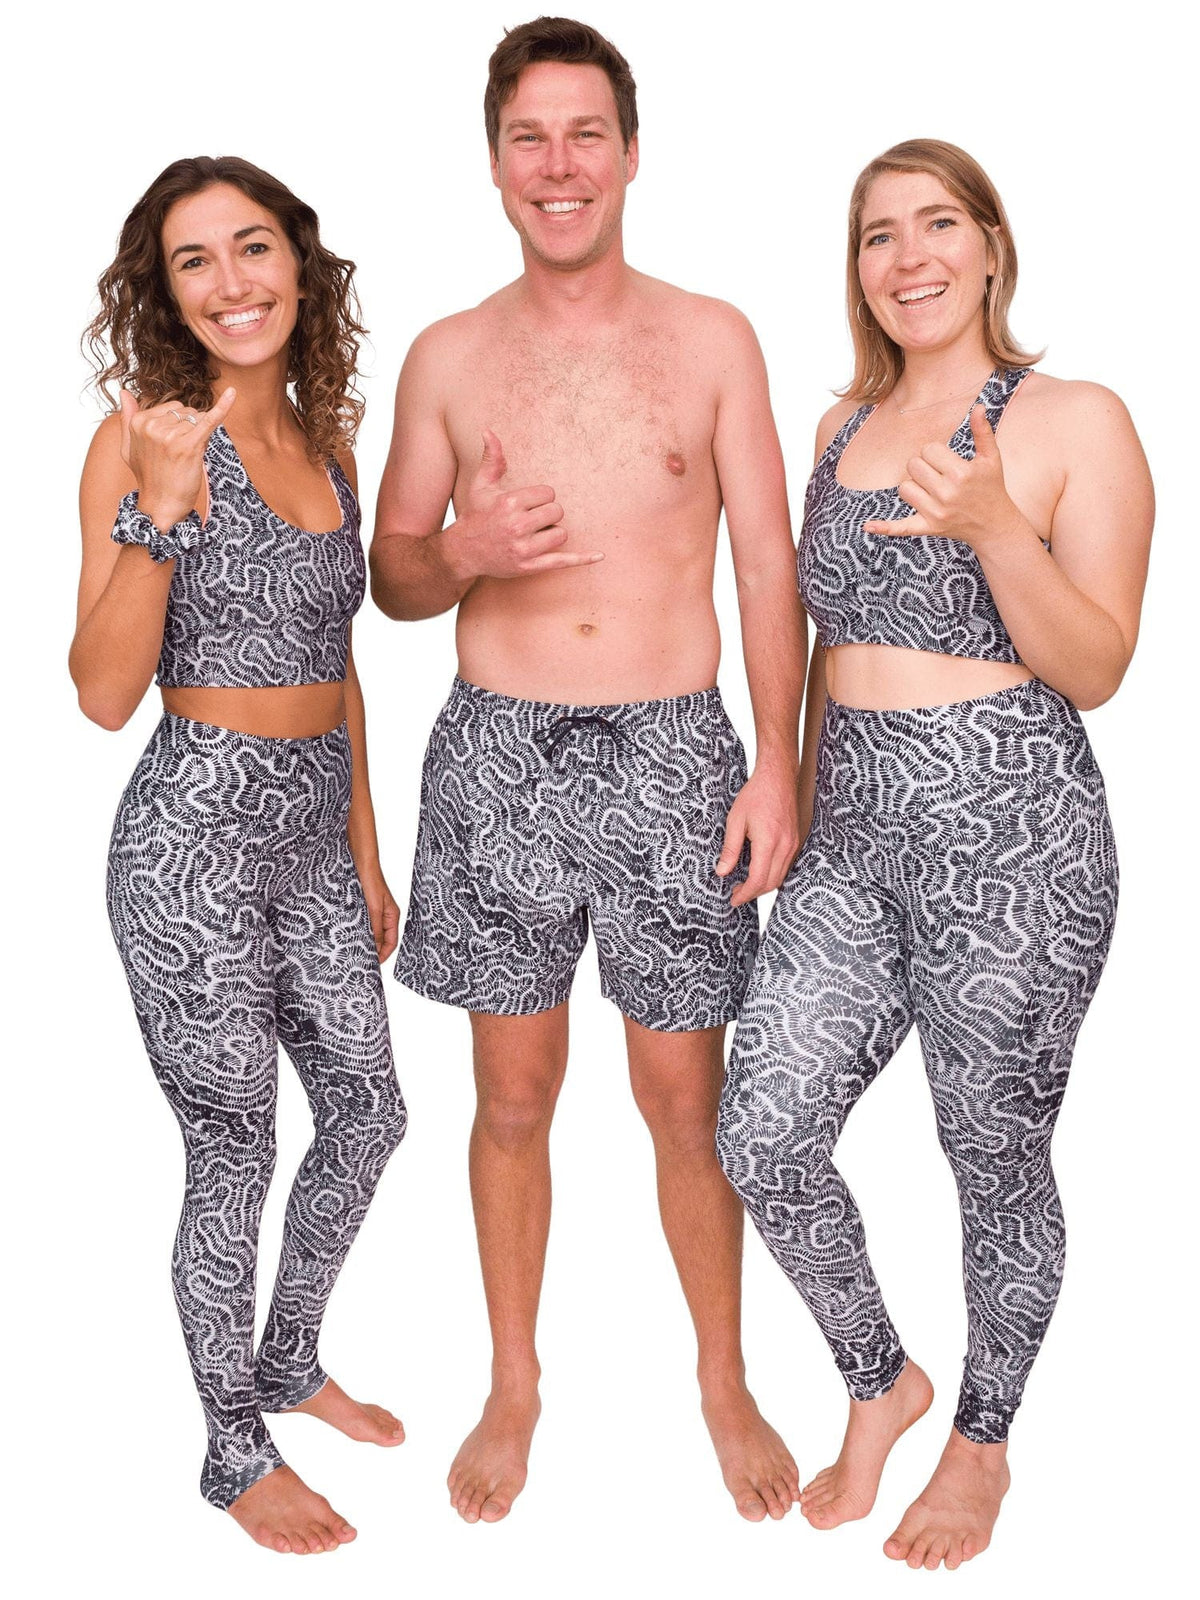 matching brain coral leggings, reversible top, and shorts pictured on a man and two women